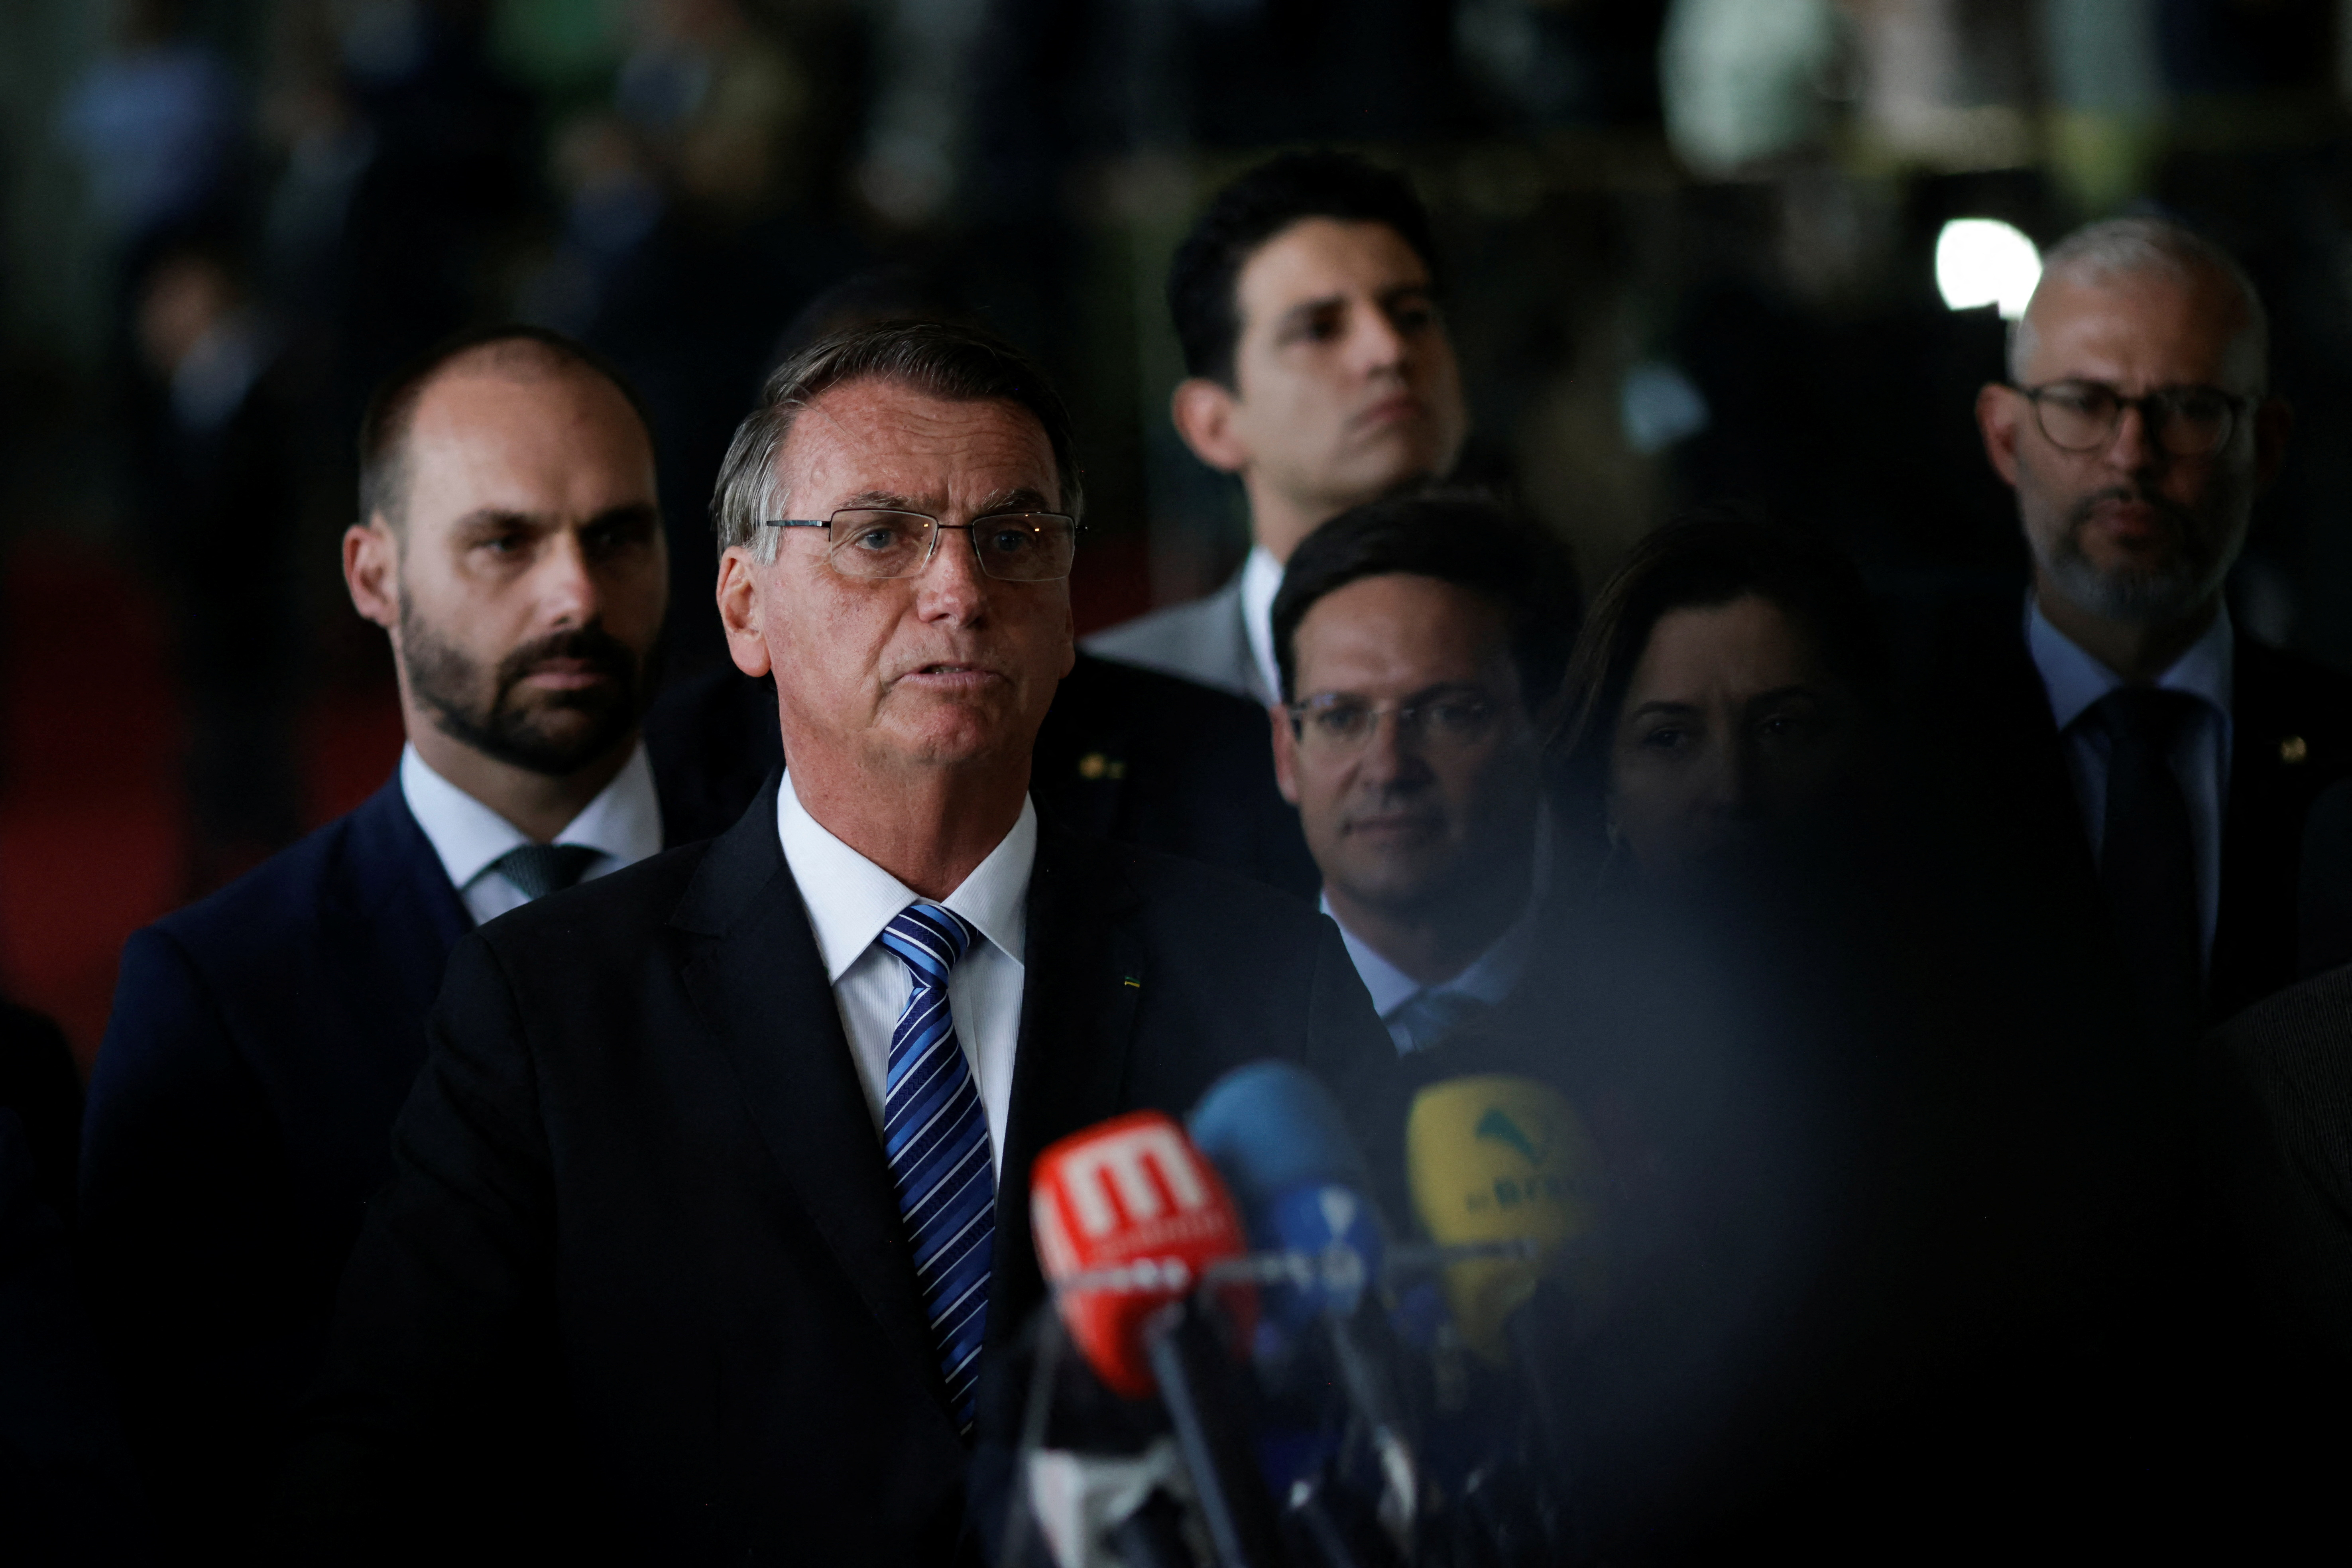 Jair Bolsonaro has authorized the Chief of Staff to start this process with the newly elected Lula da Silva team (Reuters)